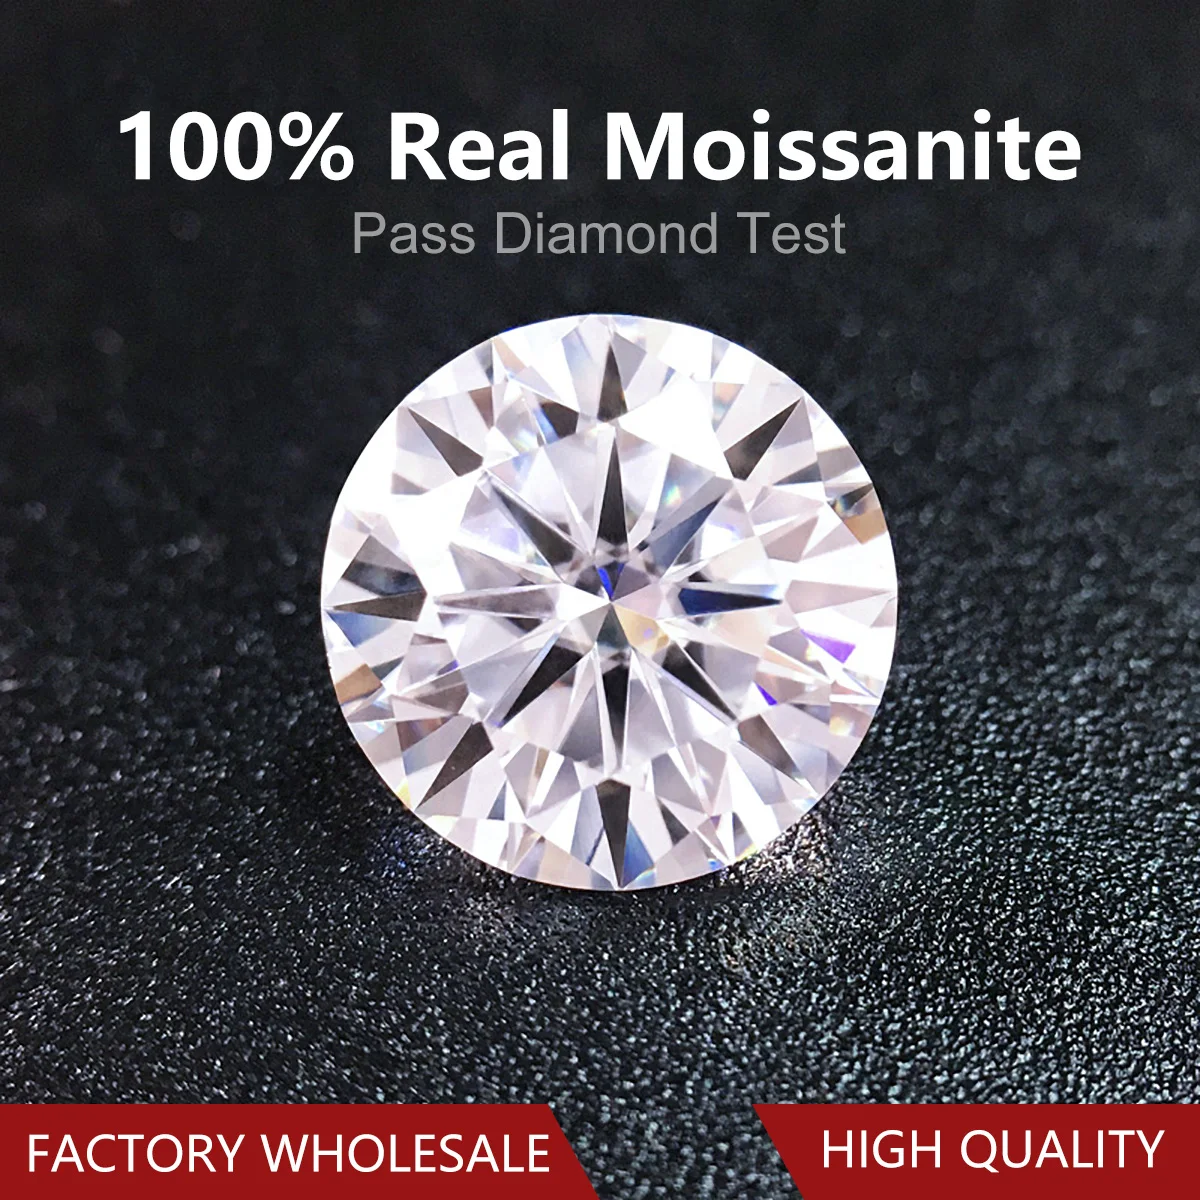 Wholesalers Real 0.1ct To 10ct D Color Round Cut Certified Moissanite Gems Pass Diamond Test Loose Precious Stones Fast Shipping